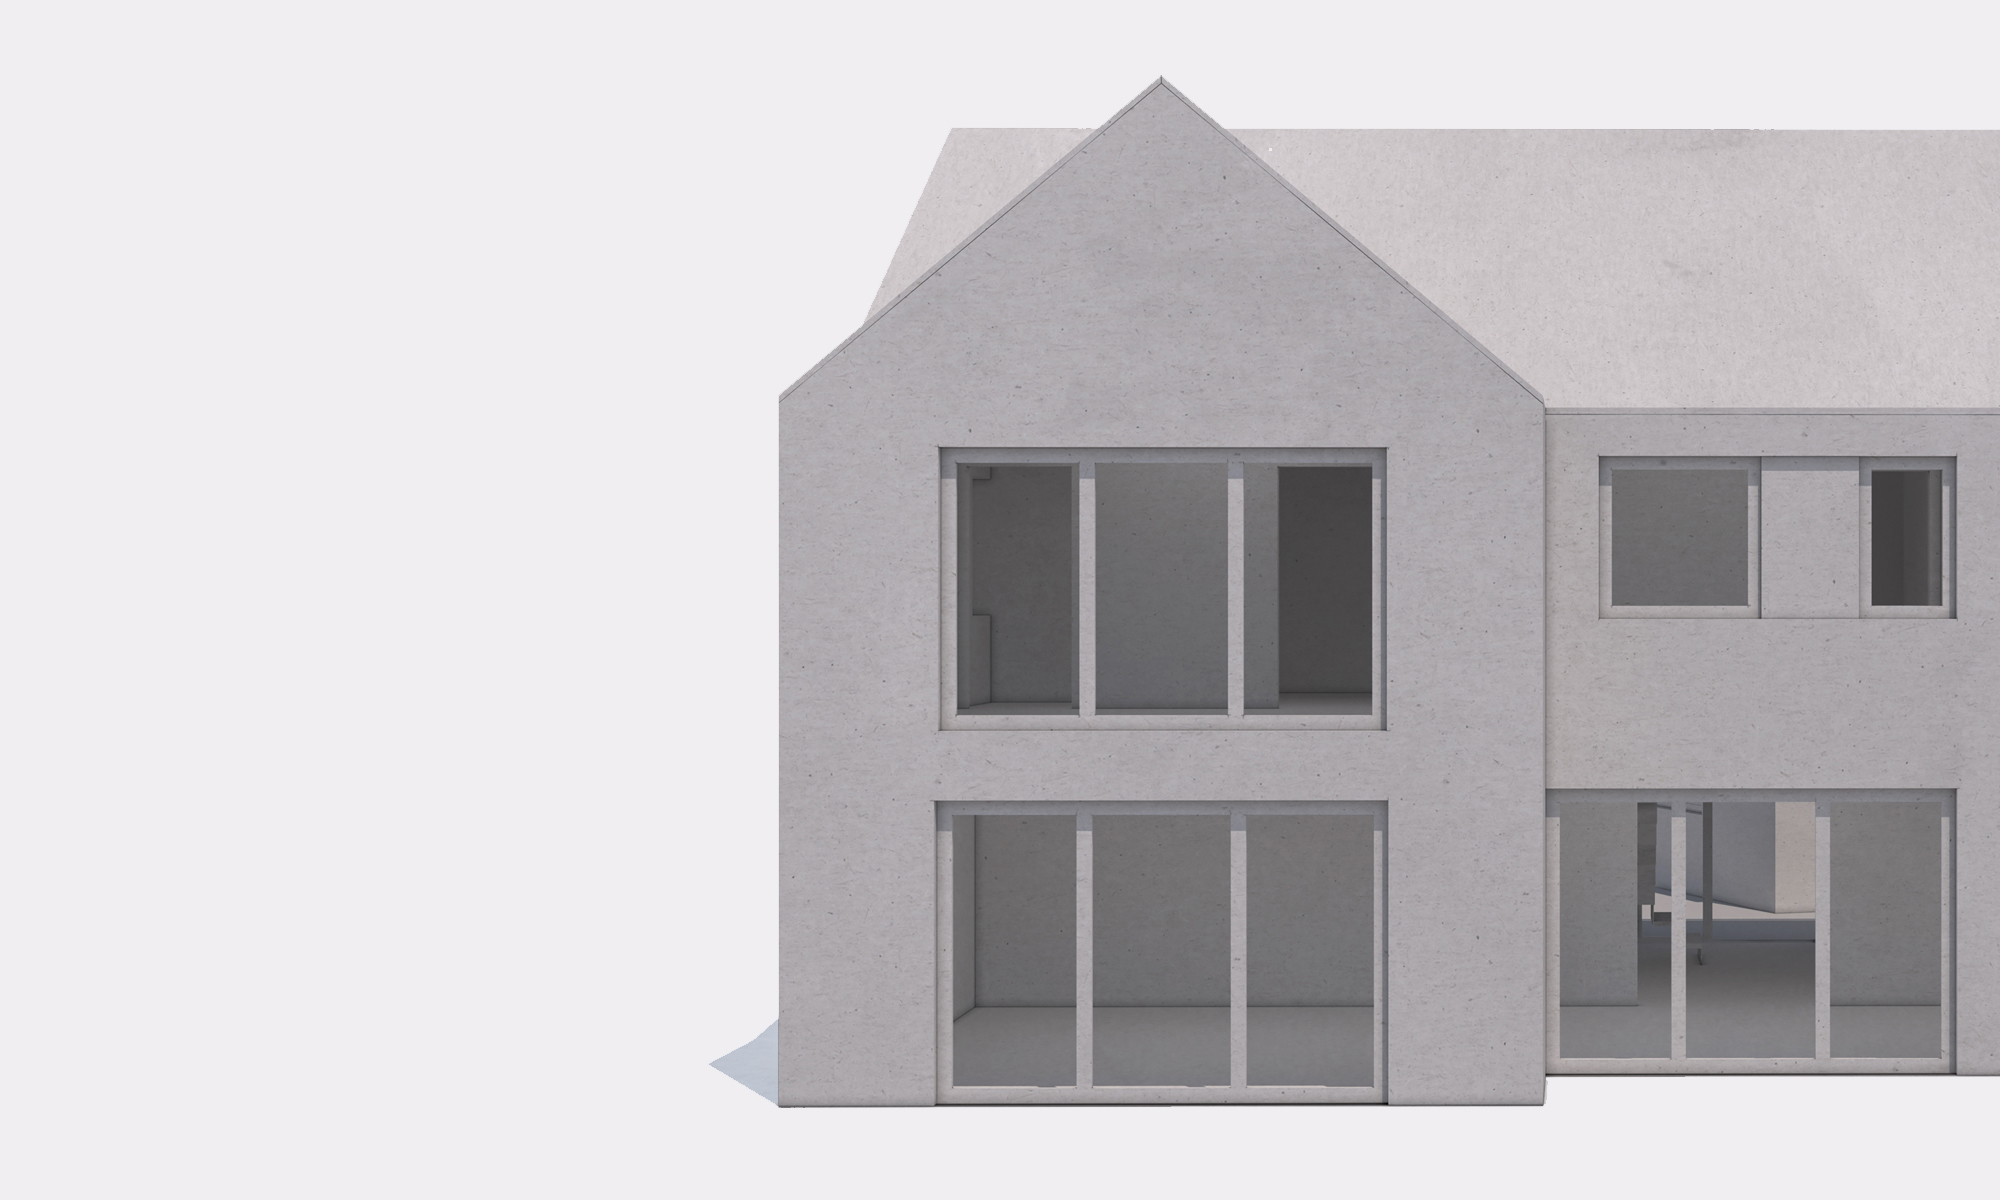 Stepped house Planning Permission